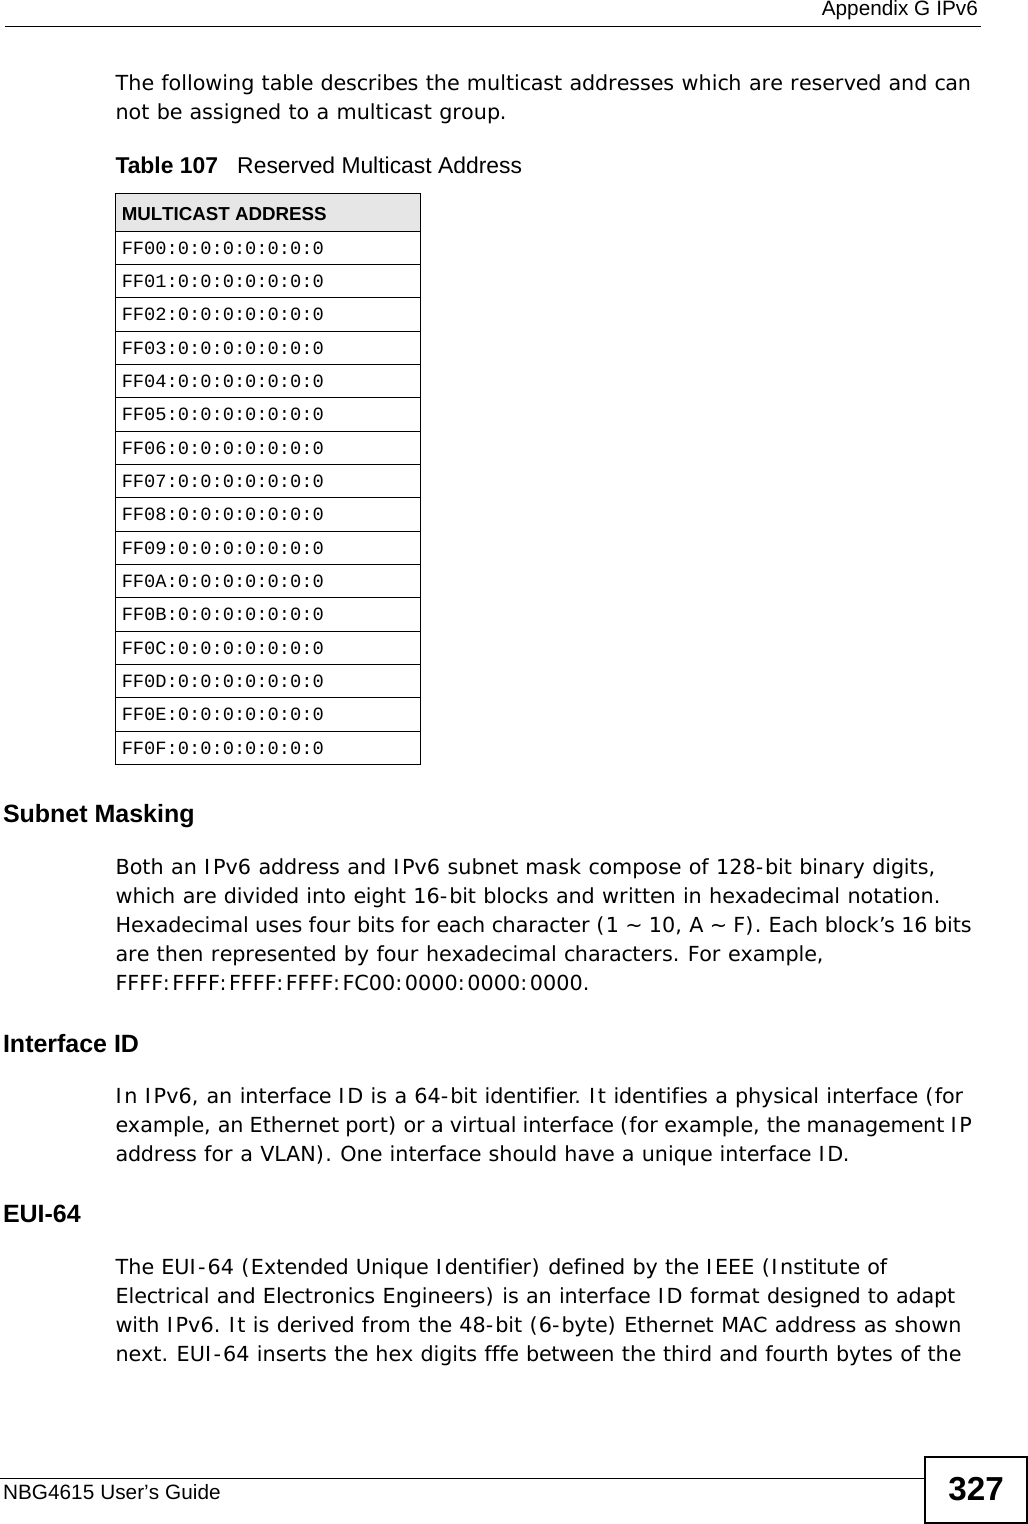  Appendix G IPv6NBG4615 User’s Guide 327The following table describes the multicast addresses which are reserved and can not be assigned to a multicast group. Subnet MaskingBoth an IPv6 address and IPv6 subnet mask compose of 128-bit binary digits, which are divided into eight 16-bit blocks and written in hexadecimal notation. Hexadecimal uses four bits for each character (1 ~ 10, A ~ F). Each block’s 16 bits are then represented by four hexadecimal characters. For example, FFFF:FFFF:FFFF:FFFF:FC00:0000:0000:0000.Interface IDIn IPv6, an interface ID is a 64-bit identifier. It identifies a physical interface (for example, an Ethernet port) or a virtual interface (for example, the management IP address for a VLAN). One interface should have a unique interface ID.EUI-64The EUI-64 (Extended Unique Identifier) defined by the IEEE (Institute of Electrical and Electronics Engineers) is an interface ID format designed to adapt with IPv6. It is derived from the 48-bit (6-byte) Ethernet MAC address as shown next. EUI-64 inserts the hex digits fffe between the third and fourth bytes of the Table 107   Reserved Multicast AddressMULTICAST ADDRESSFF00:0:0:0:0:0:0:0FF01:0:0:0:0:0:0:0FF02:0:0:0:0:0:0:0FF03:0:0:0:0:0:0:0FF04:0:0:0:0:0:0:0FF05:0:0:0:0:0:0:0FF06:0:0:0:0:0:0:0FF07:0:0:0:0:0:0:0FF08:0:0:0:0:0:0:0FF09:0:0:0:0:0:0:0FF0A:0:0:0:0:0:0:0FF0B:0:0:0:0:0:0:0FF0C:0:0:0:0:0:0:0FF0D:0:0:0:0:0:0:0FF0E:0:0:0:0:0:0:0FF0F:0:0:0:0:0:0:0